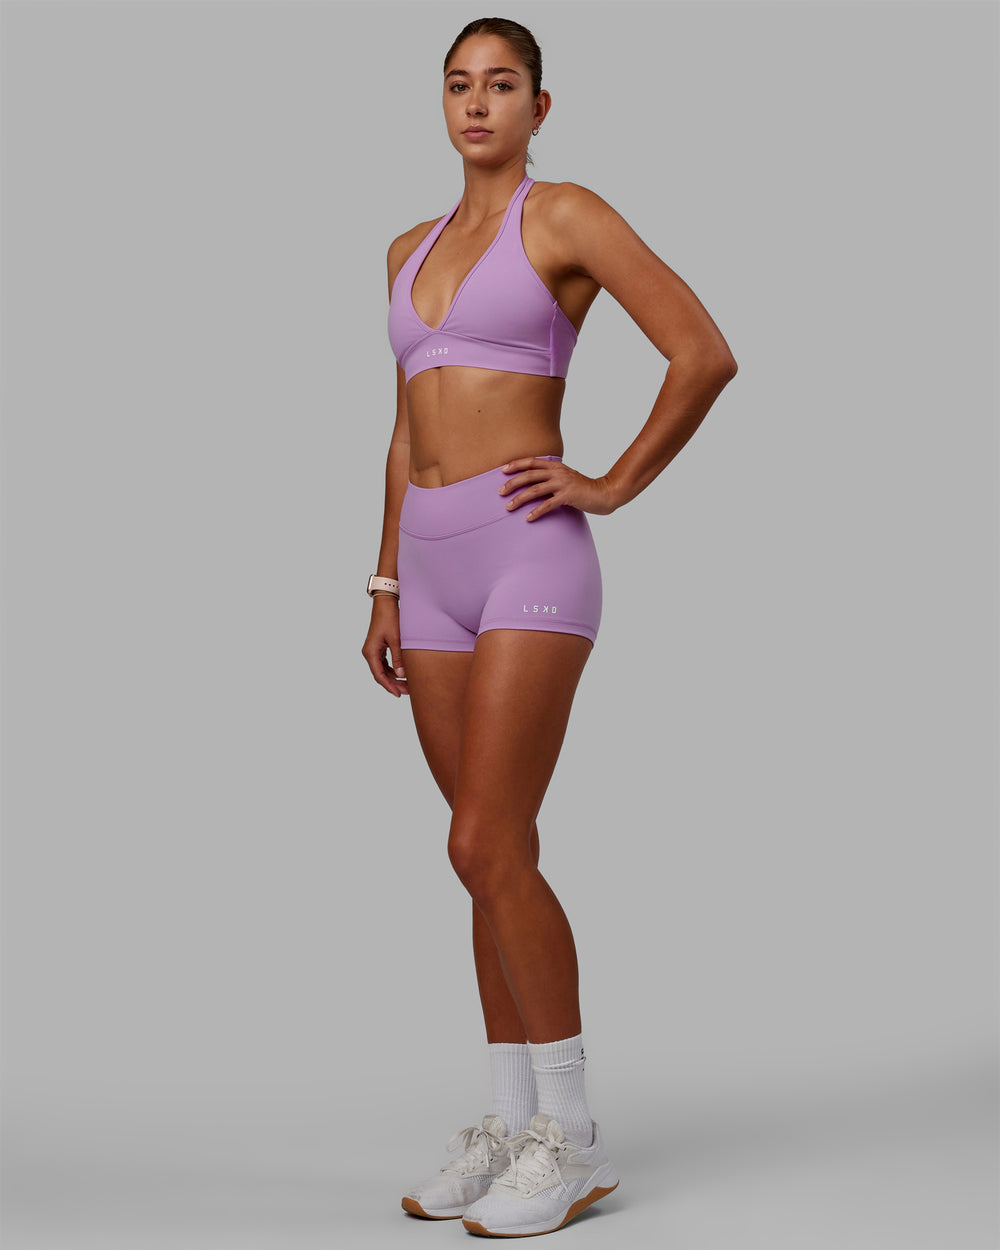 Woman wearing RXD Micro Short Tights - Light Violet